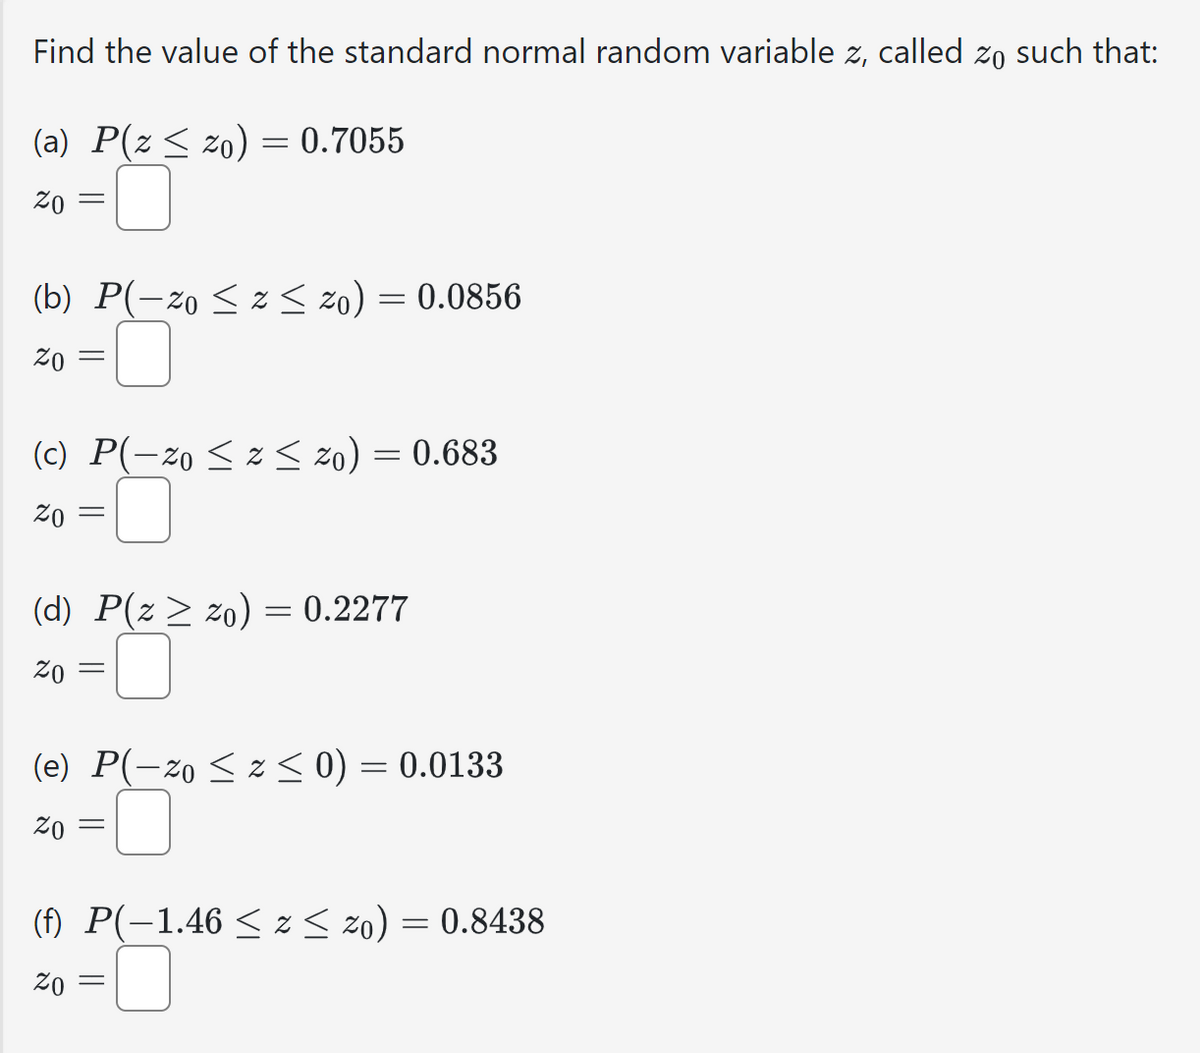 Find the value of the standard normal random variable z, called zo such that:
(a) P(z ≤ zo) = 0.7055
ZO
=
(b) P(-20 ≤2≤ 20) = 0.0856
Zo
=
(c) P(-20 ≤ z <zo) = 0.683
ZO
=
(d) P(z 20) = 0.2277
Zo
=
(e) P(-zoz < 0) = 0.0133
Zo
(f) P(-1.46 ≤ z < 20) = 0.8438
Zo
=